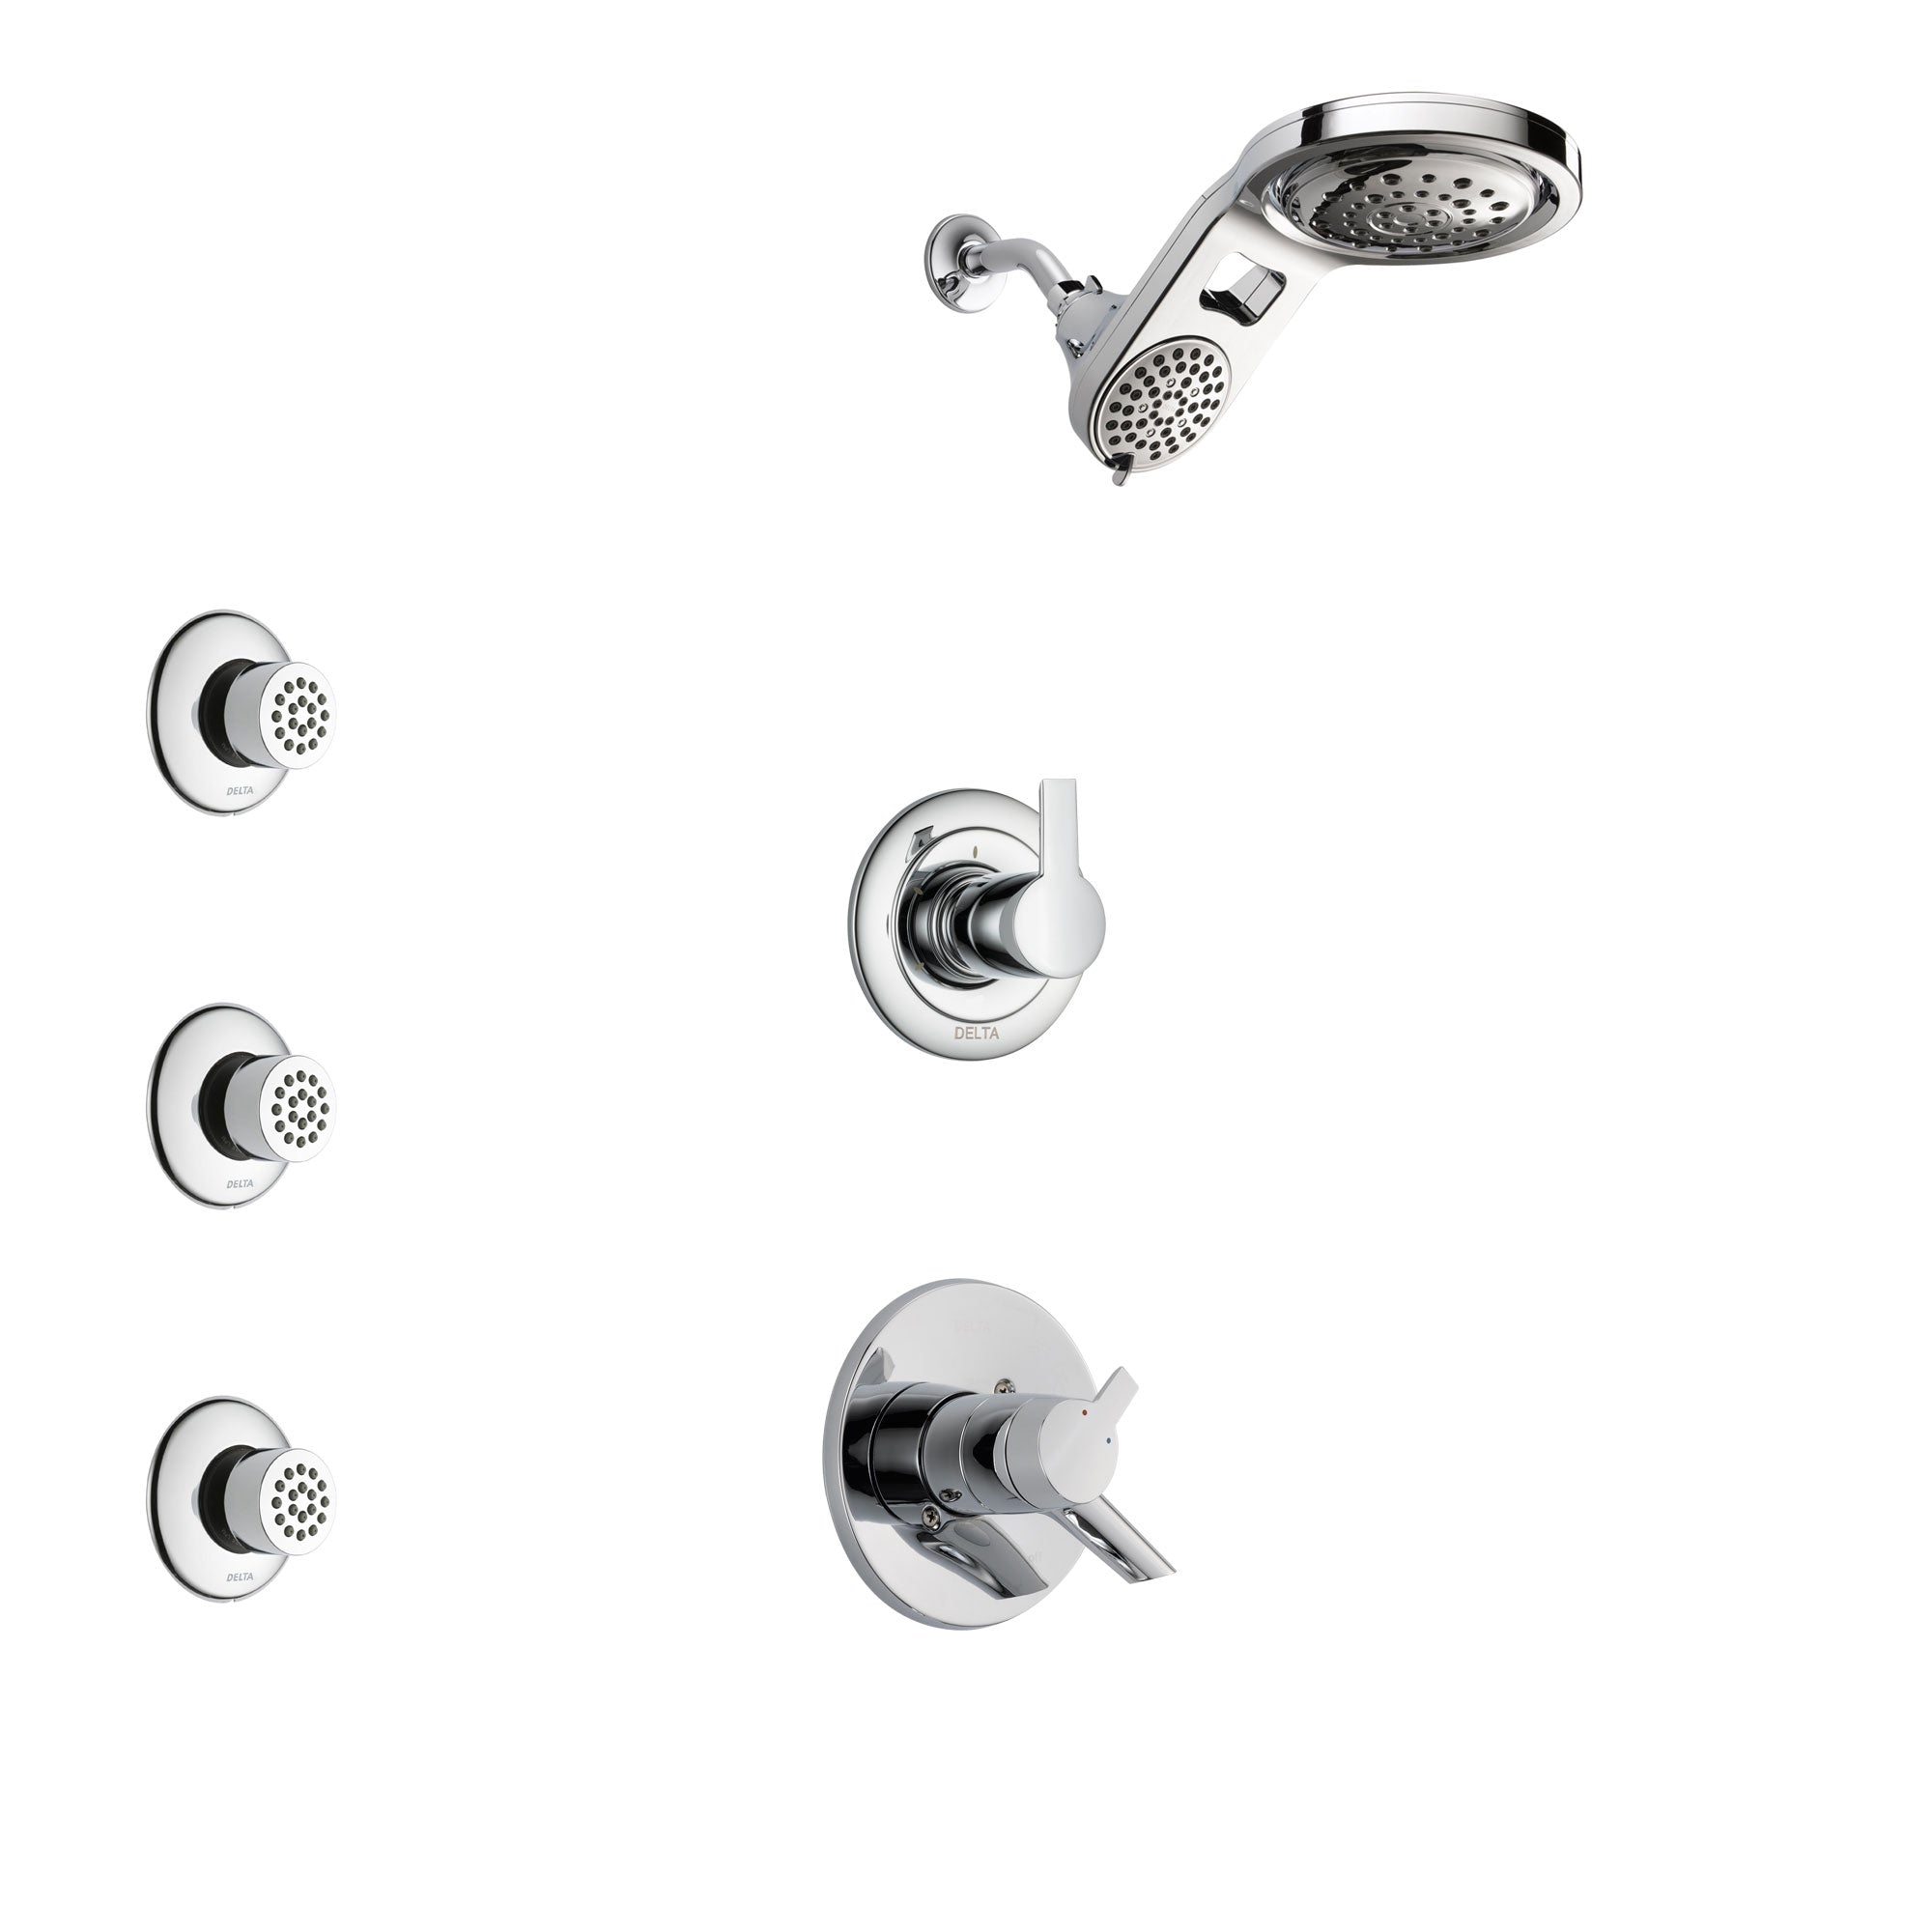 Delta Compel Chrome Finish Shower System with Dual Control Handle, 3-Setting Diverter, Dual Showerhead, and 3 Body Sprays SS17614